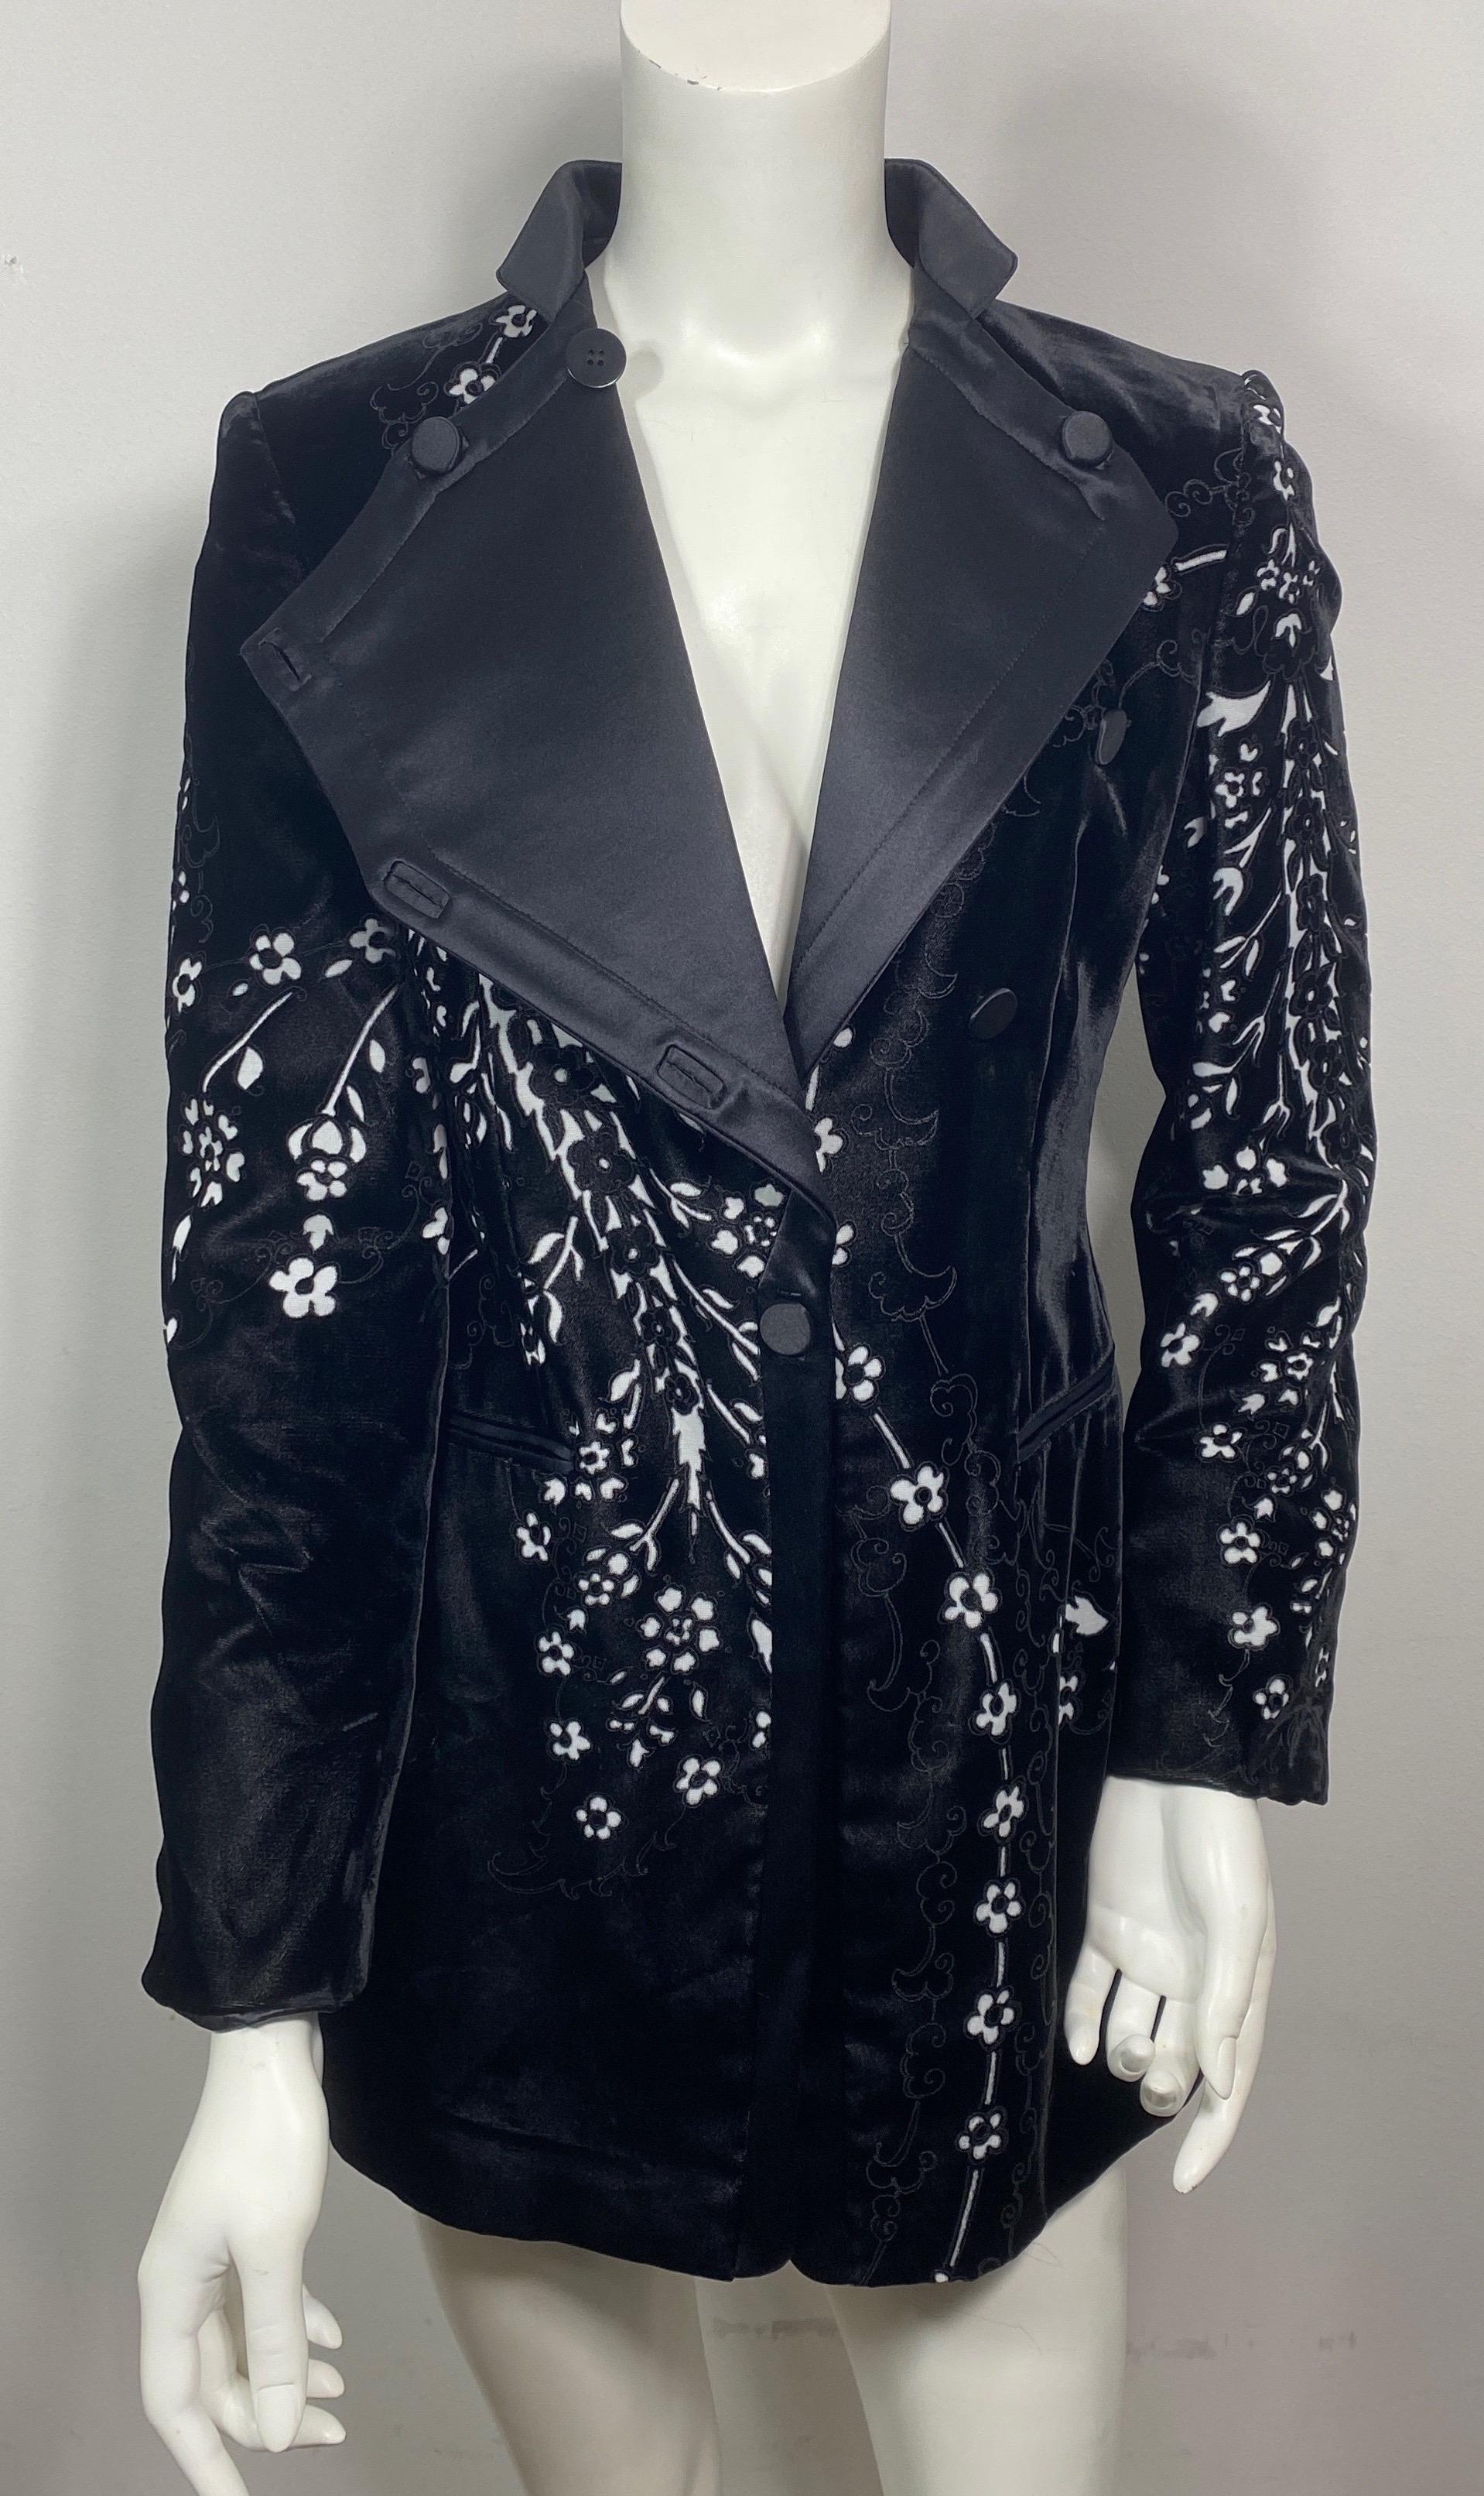 Giorgio Armani Black Velvet Cutout Jacket-size 38 This jacket has a black satin collar which can be worn in a few different ways. Open it buttons in a few places and gives the jacket two large lapels. It can also be worn closed which shows only a